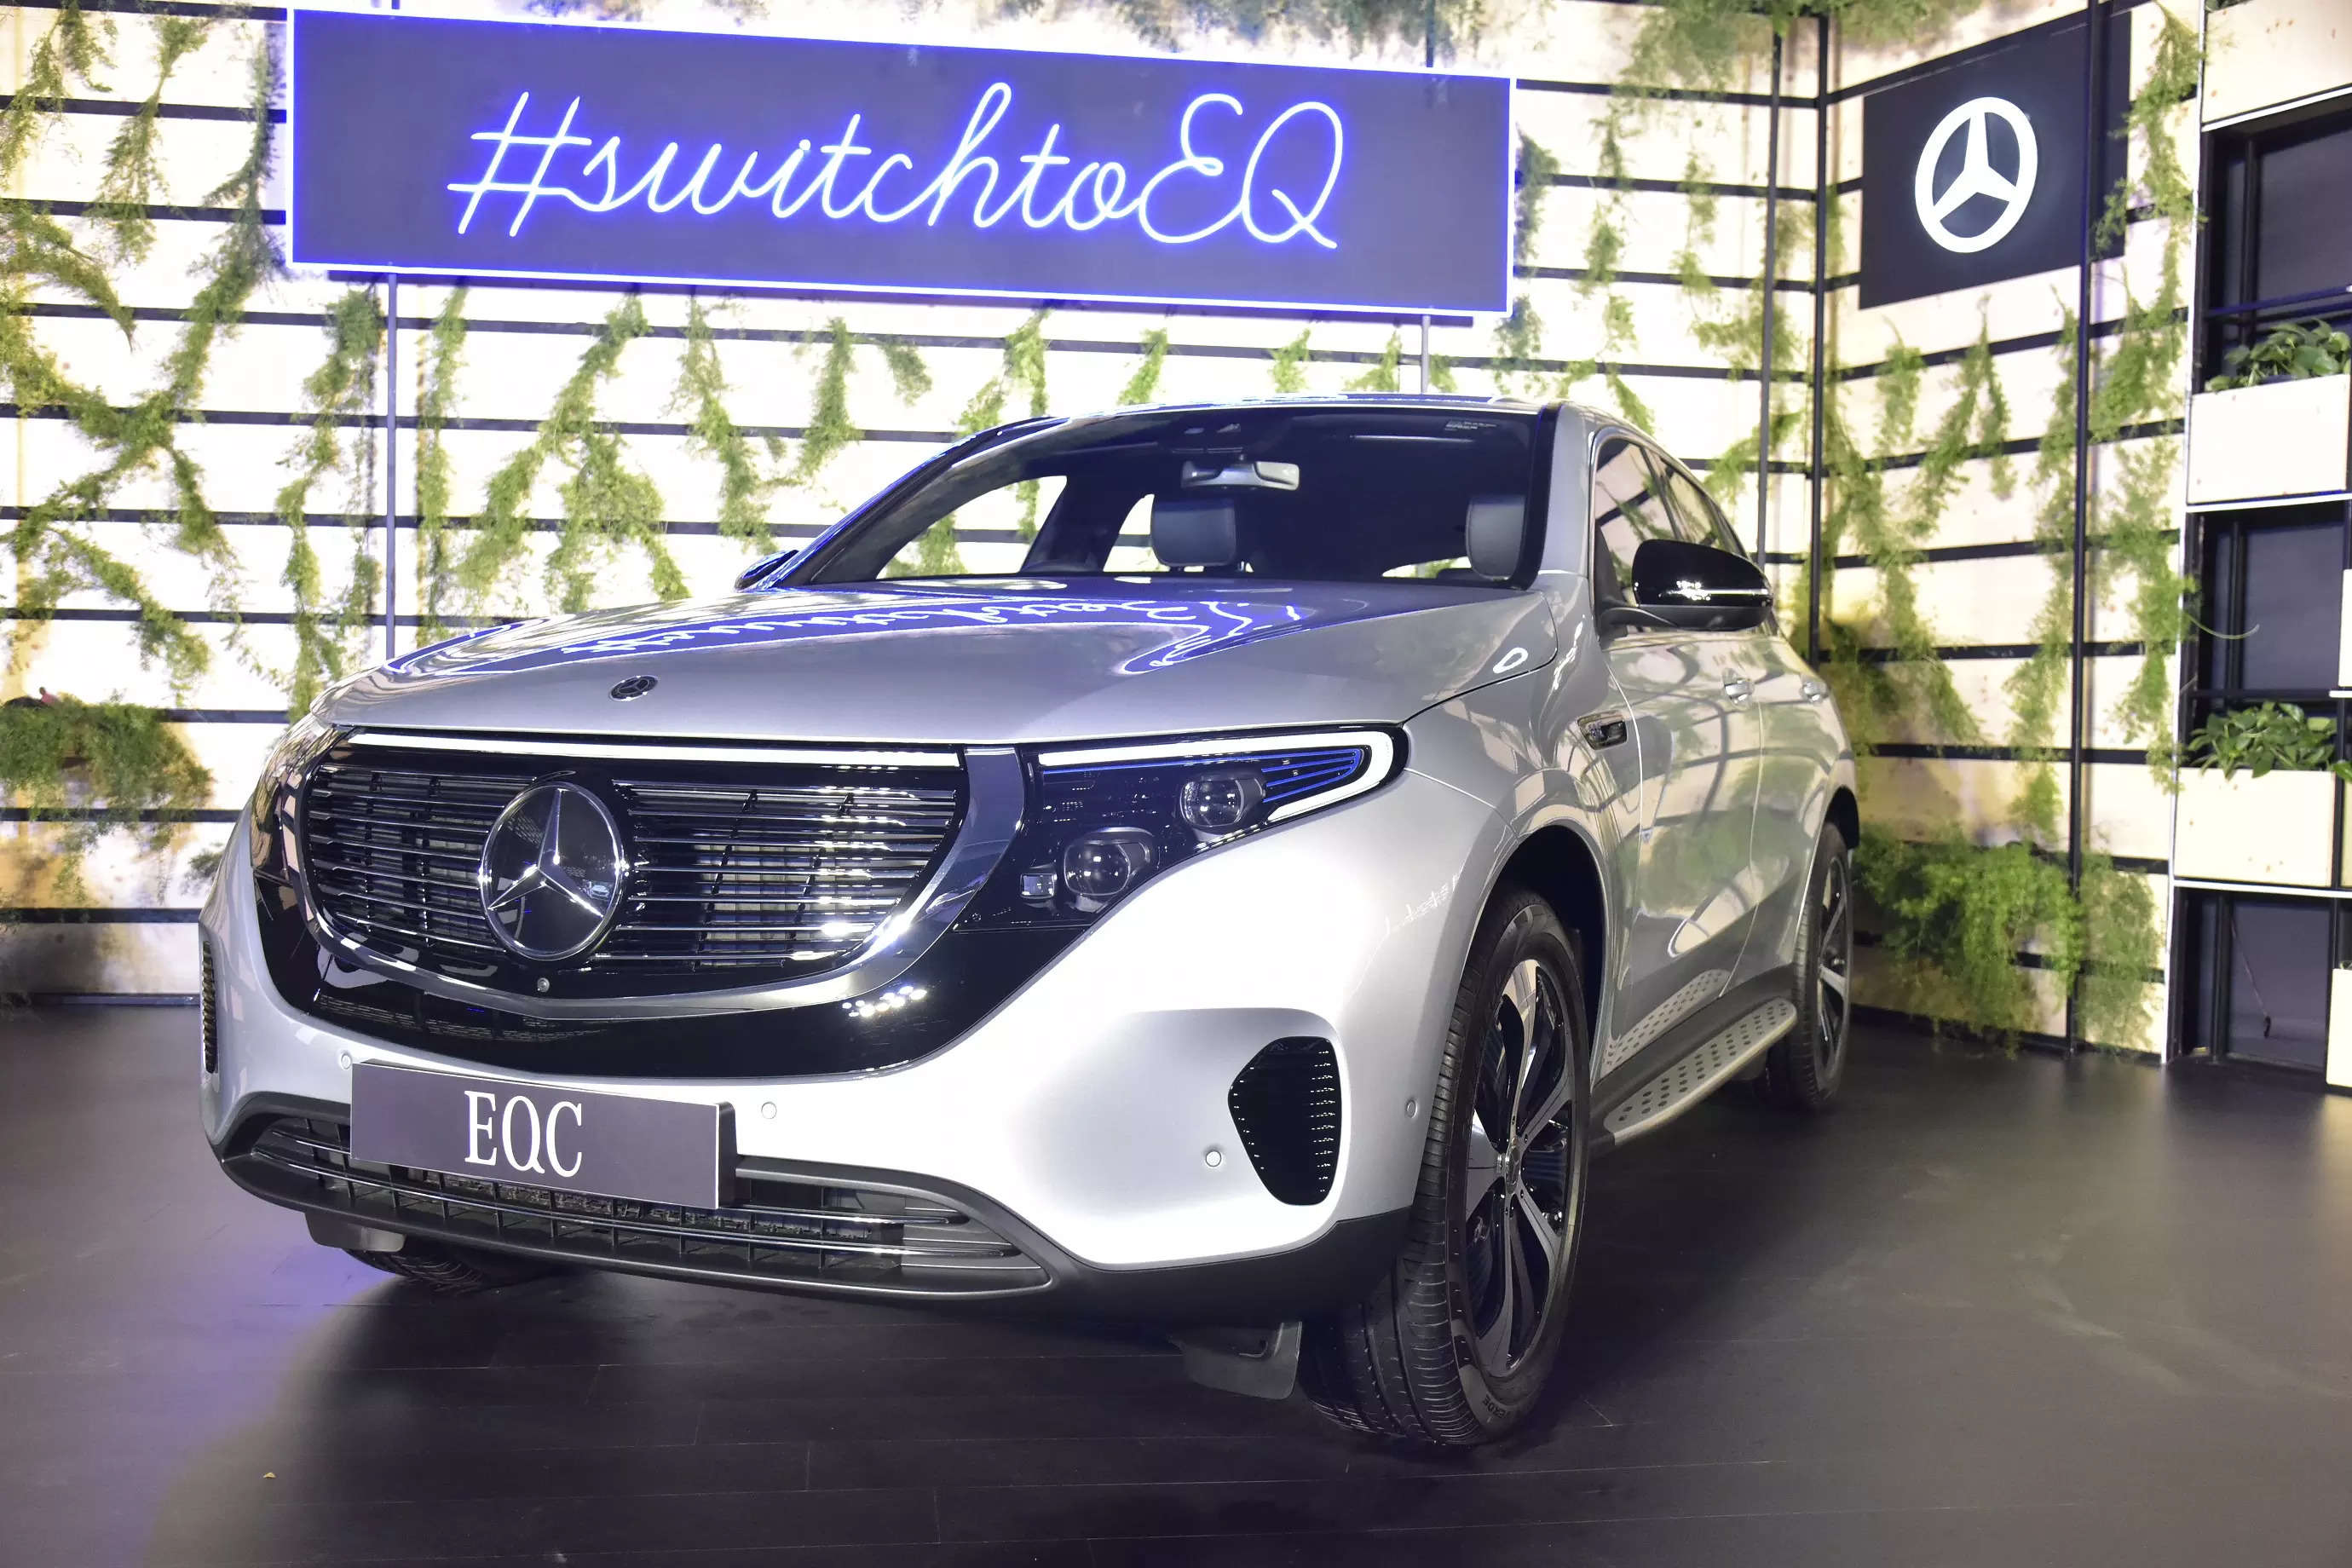 Mercedes launched its first electric car-EQC, in India almost a year ago and claims to have received good response from the market.